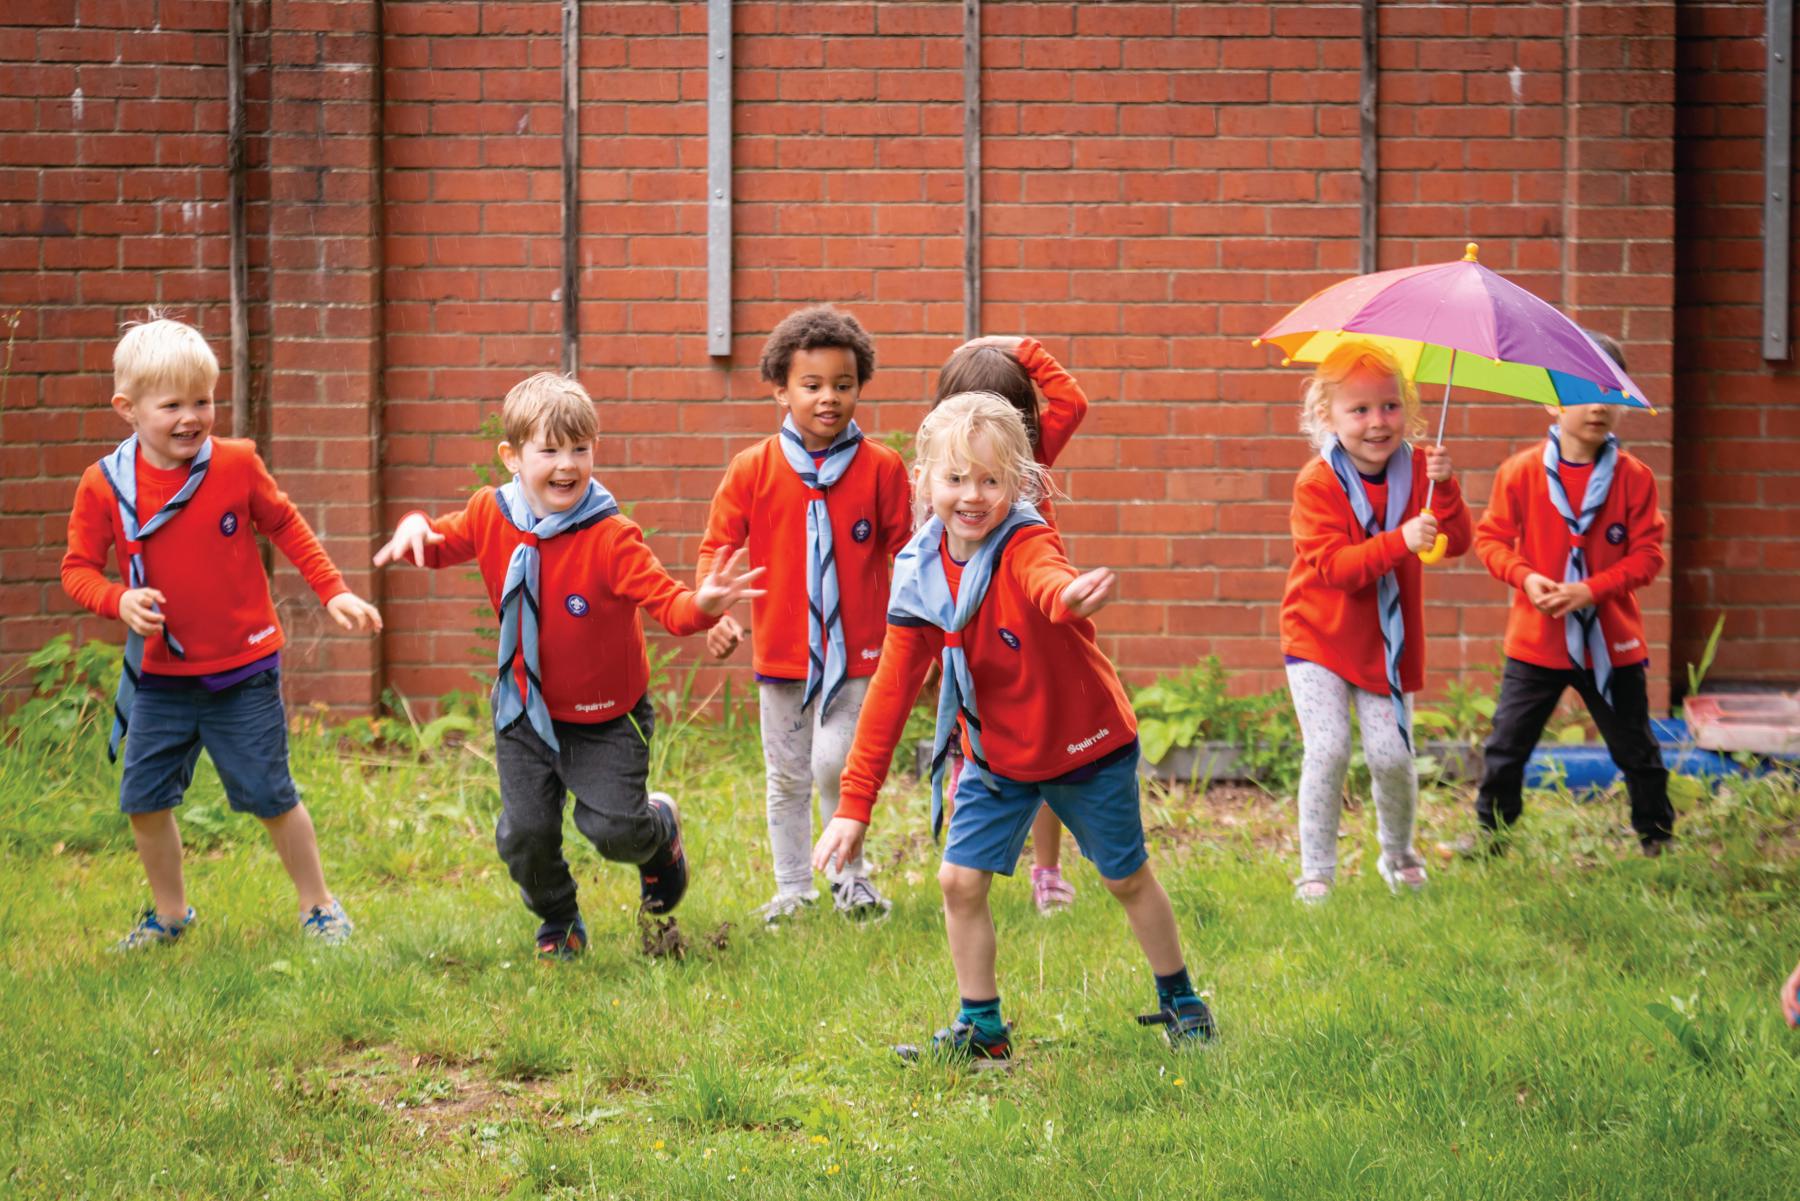 A group of Squirrels are playing on a patch of grass in front of a wall. They are playing a running came and all looking over to the right. They are all wearing red jumpers with blue neckers and have big smiles. There are four boys and three girls and they're all having lots of fun. One girl is even holding a rainbow umbrella!